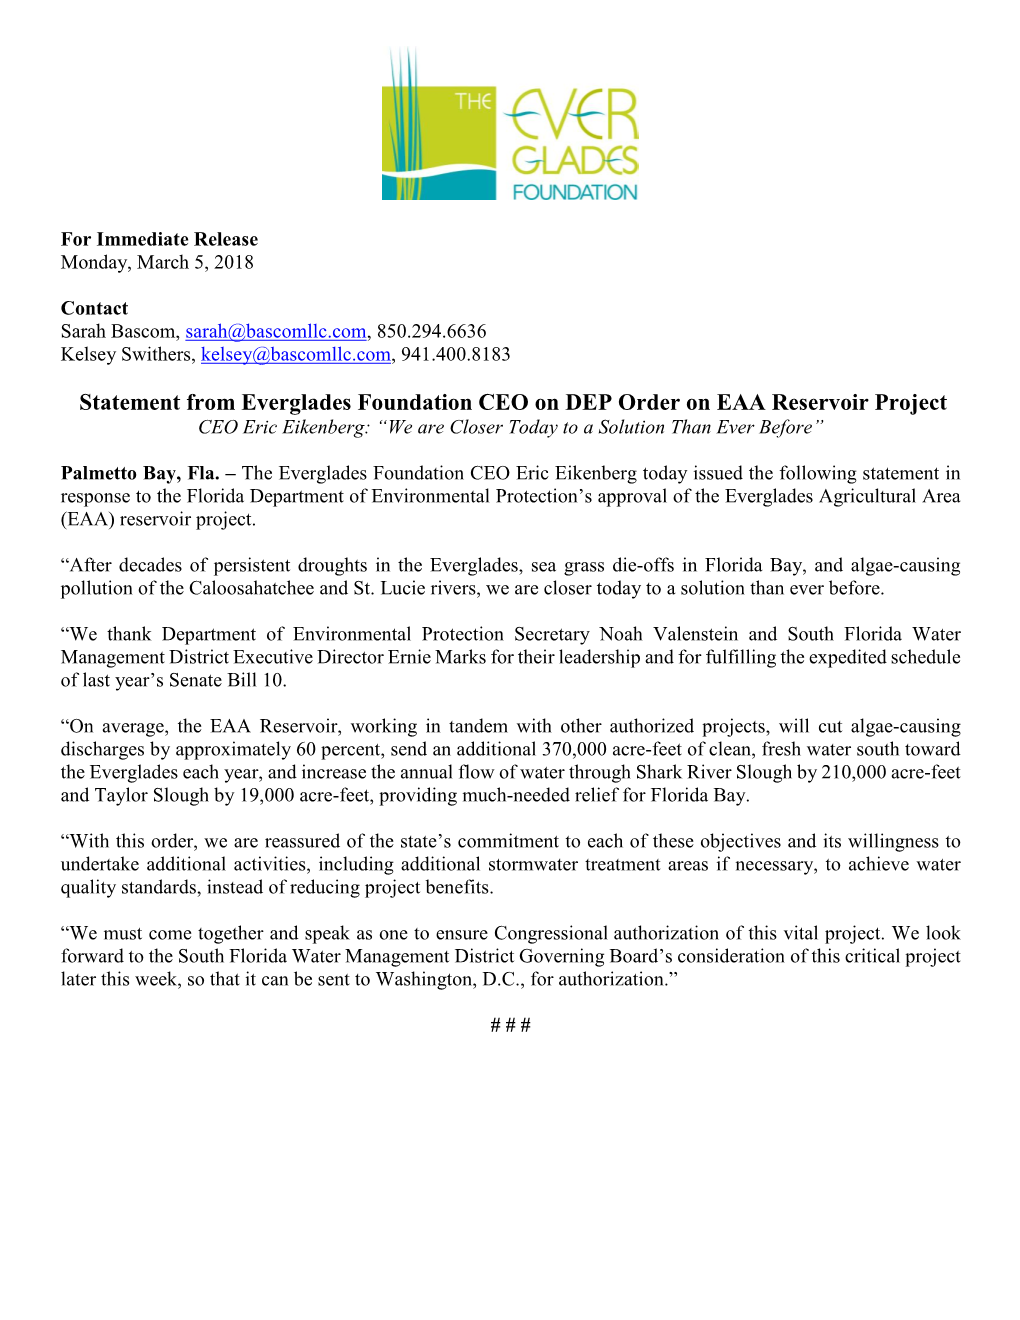 Statement from Everglades Foundation CEO on DEP Order on EAA Reservoir Project CEO Eric Eikenberg: “We Are Closer Today to a Solution Than Ever Before”